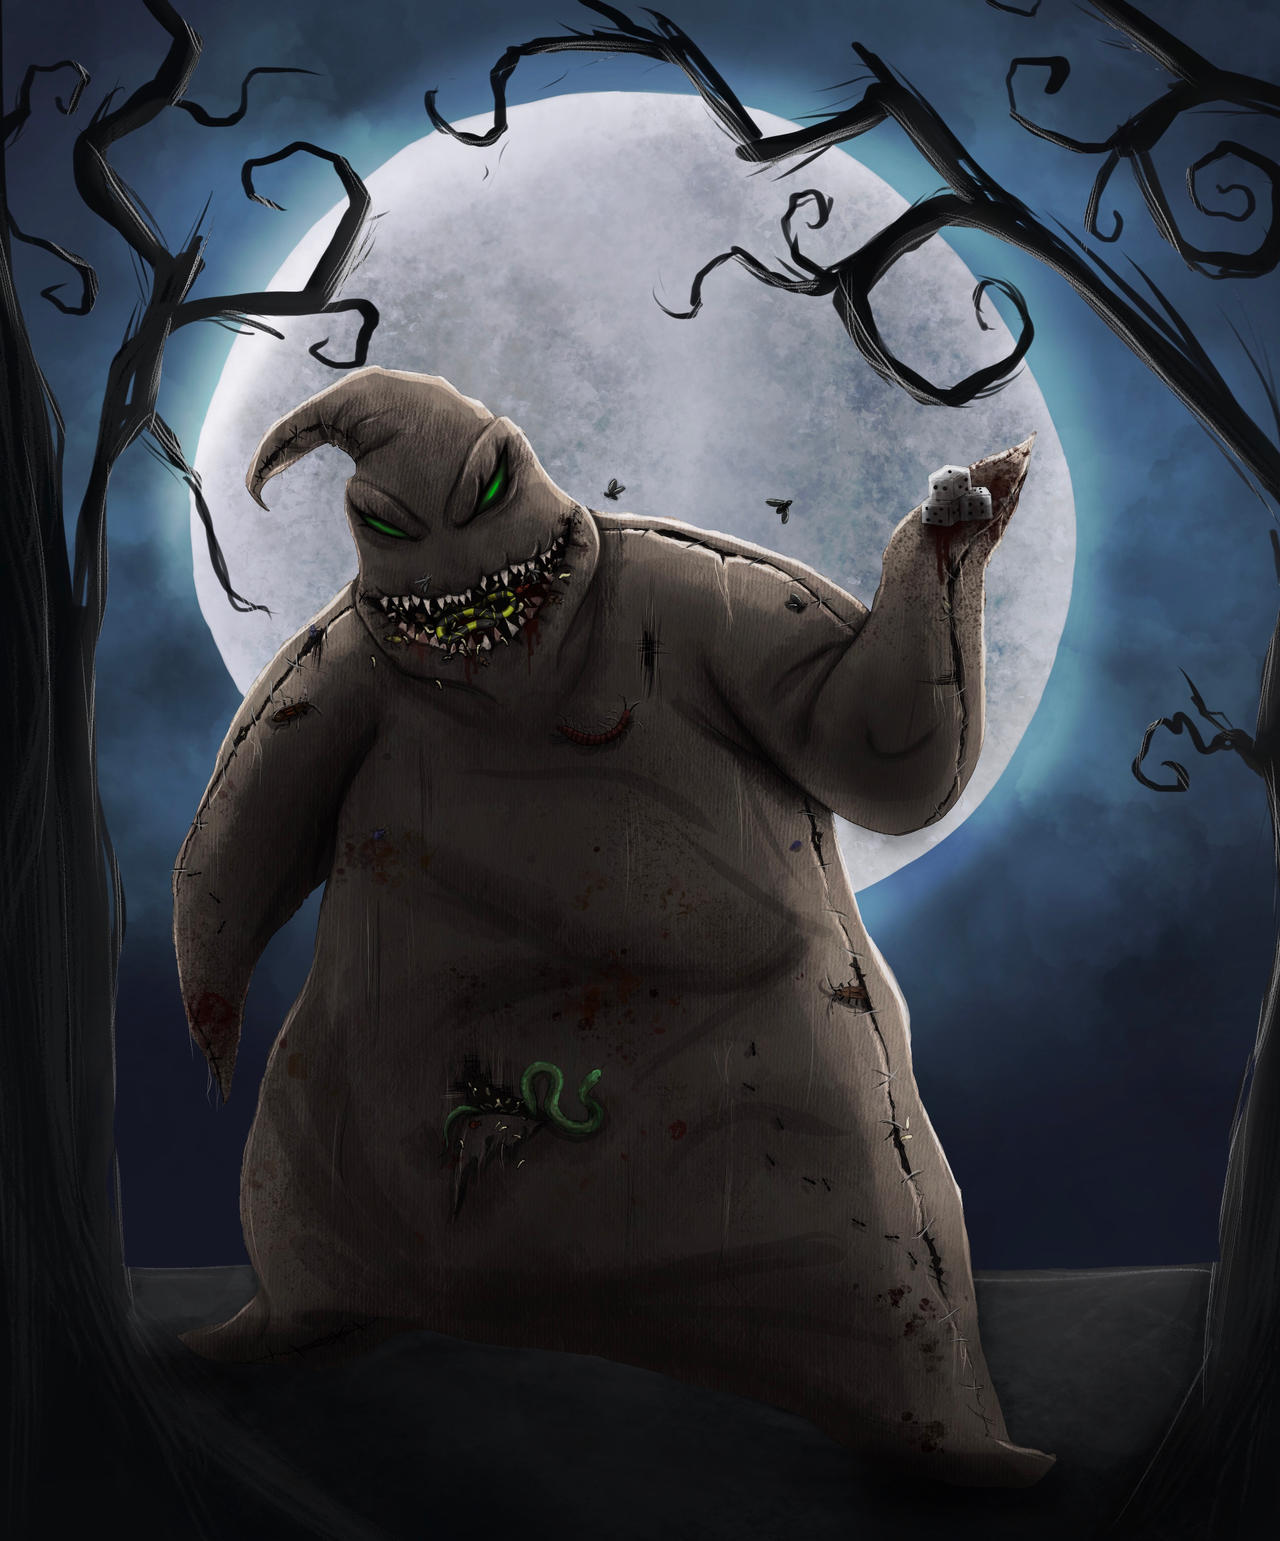 A Nightmare Before Christmas- Oogie Boogie by CaityKitty13 on DeviantArt